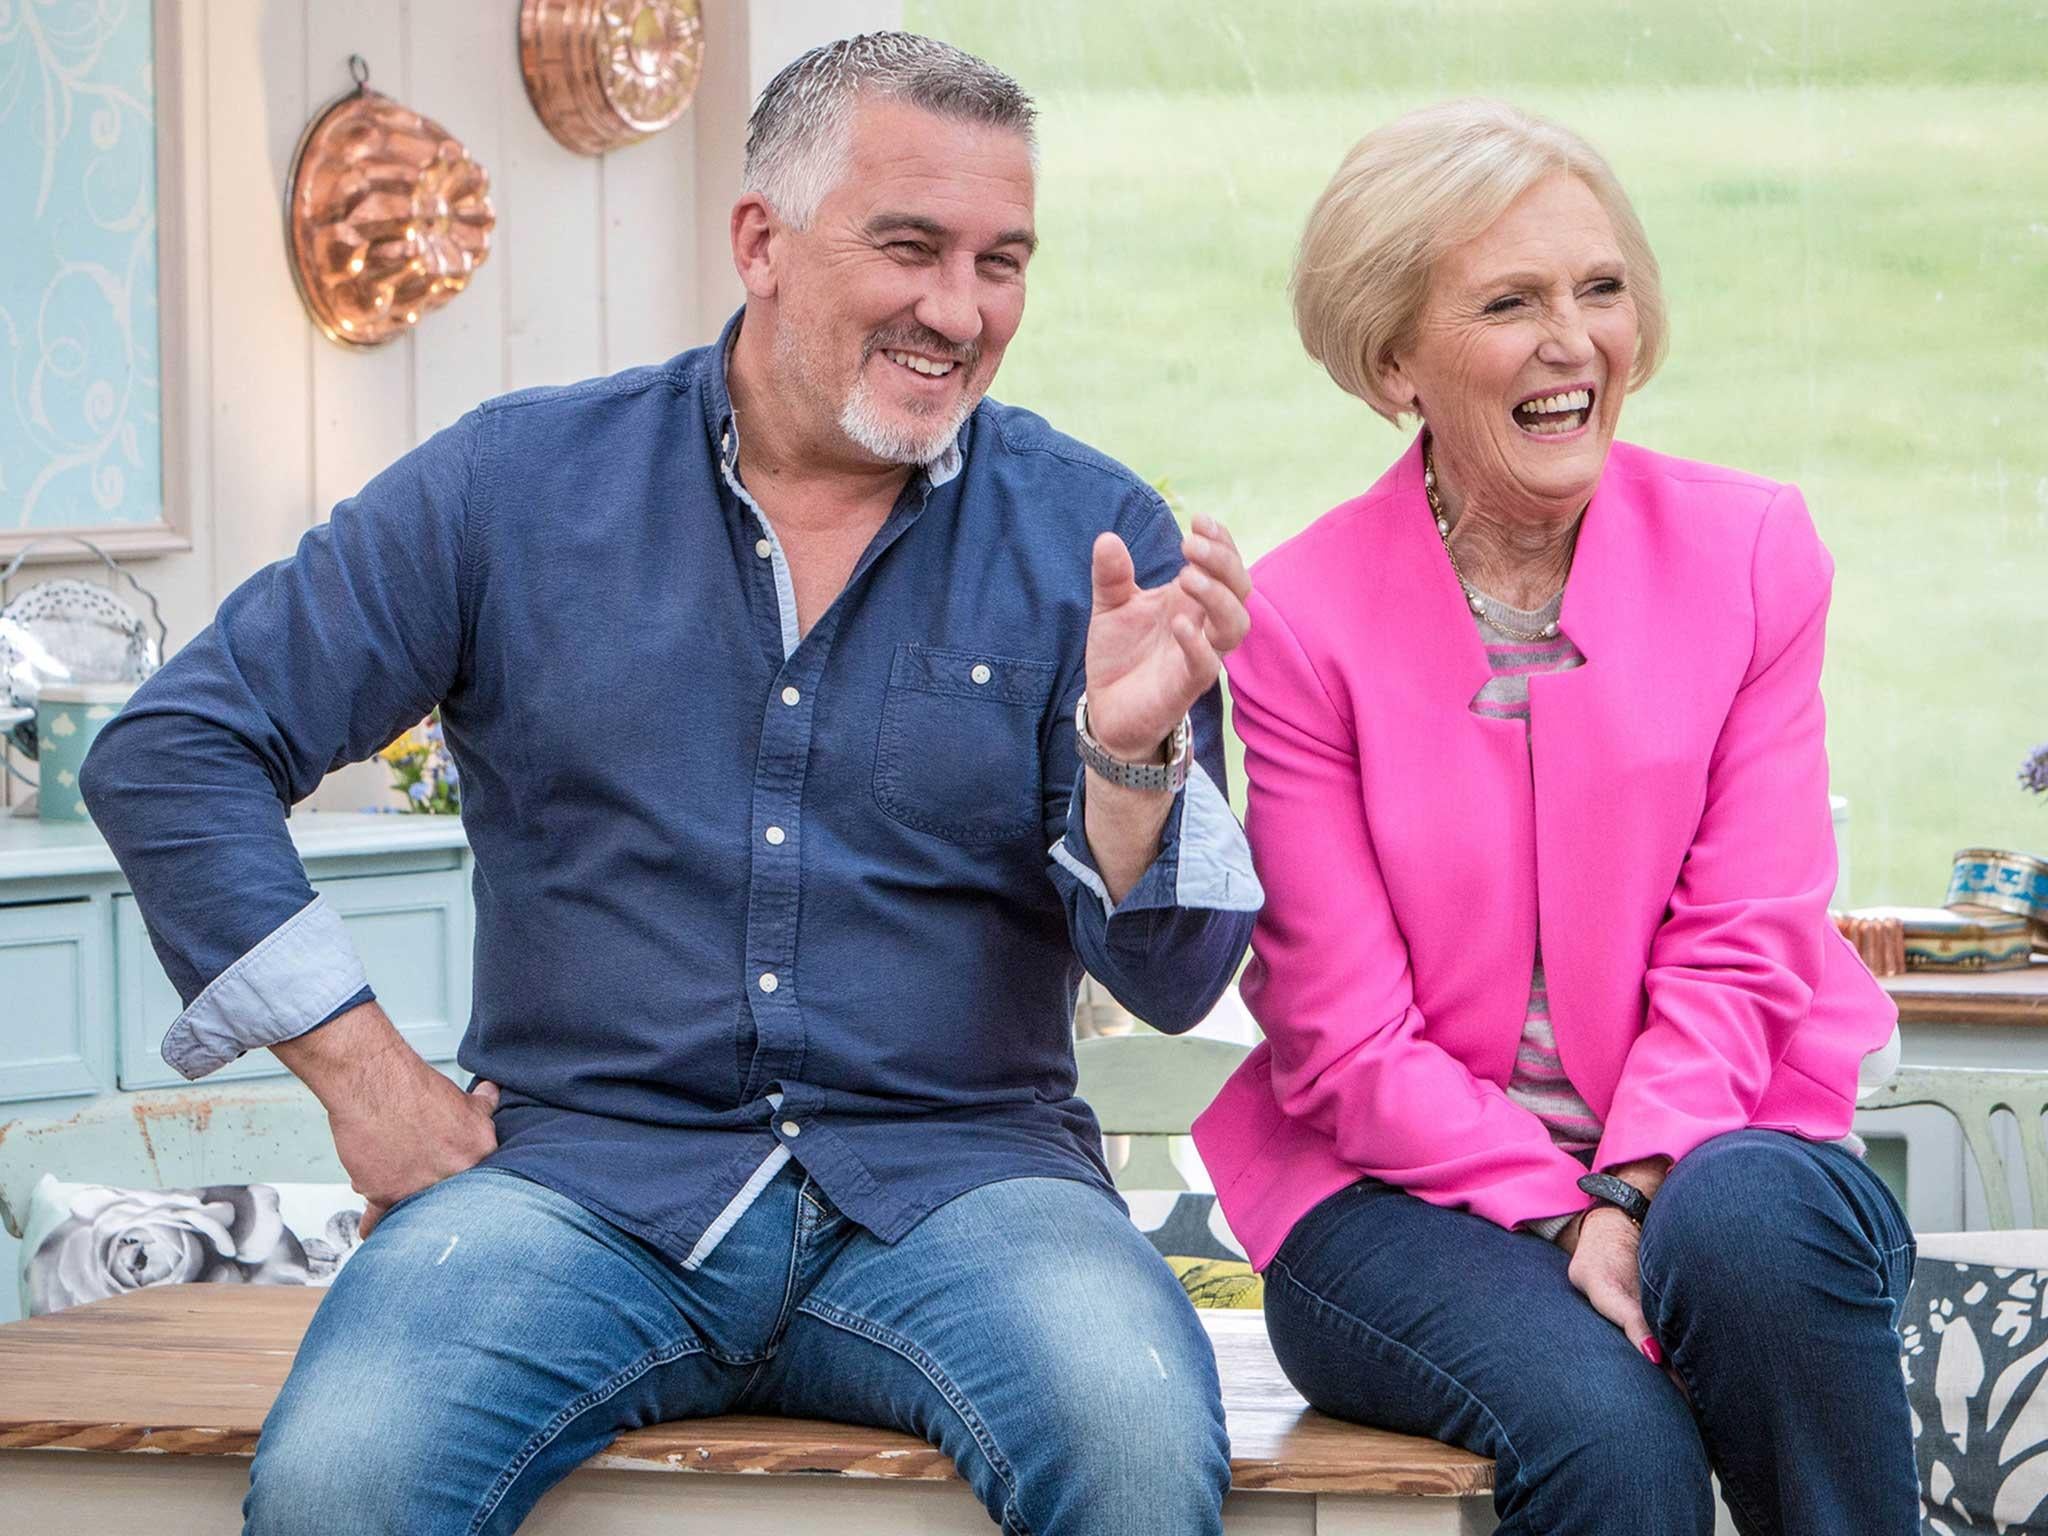 Following the Great British Bake Off's move to Channel 4, Mary Berry (left) has decided to quit the show